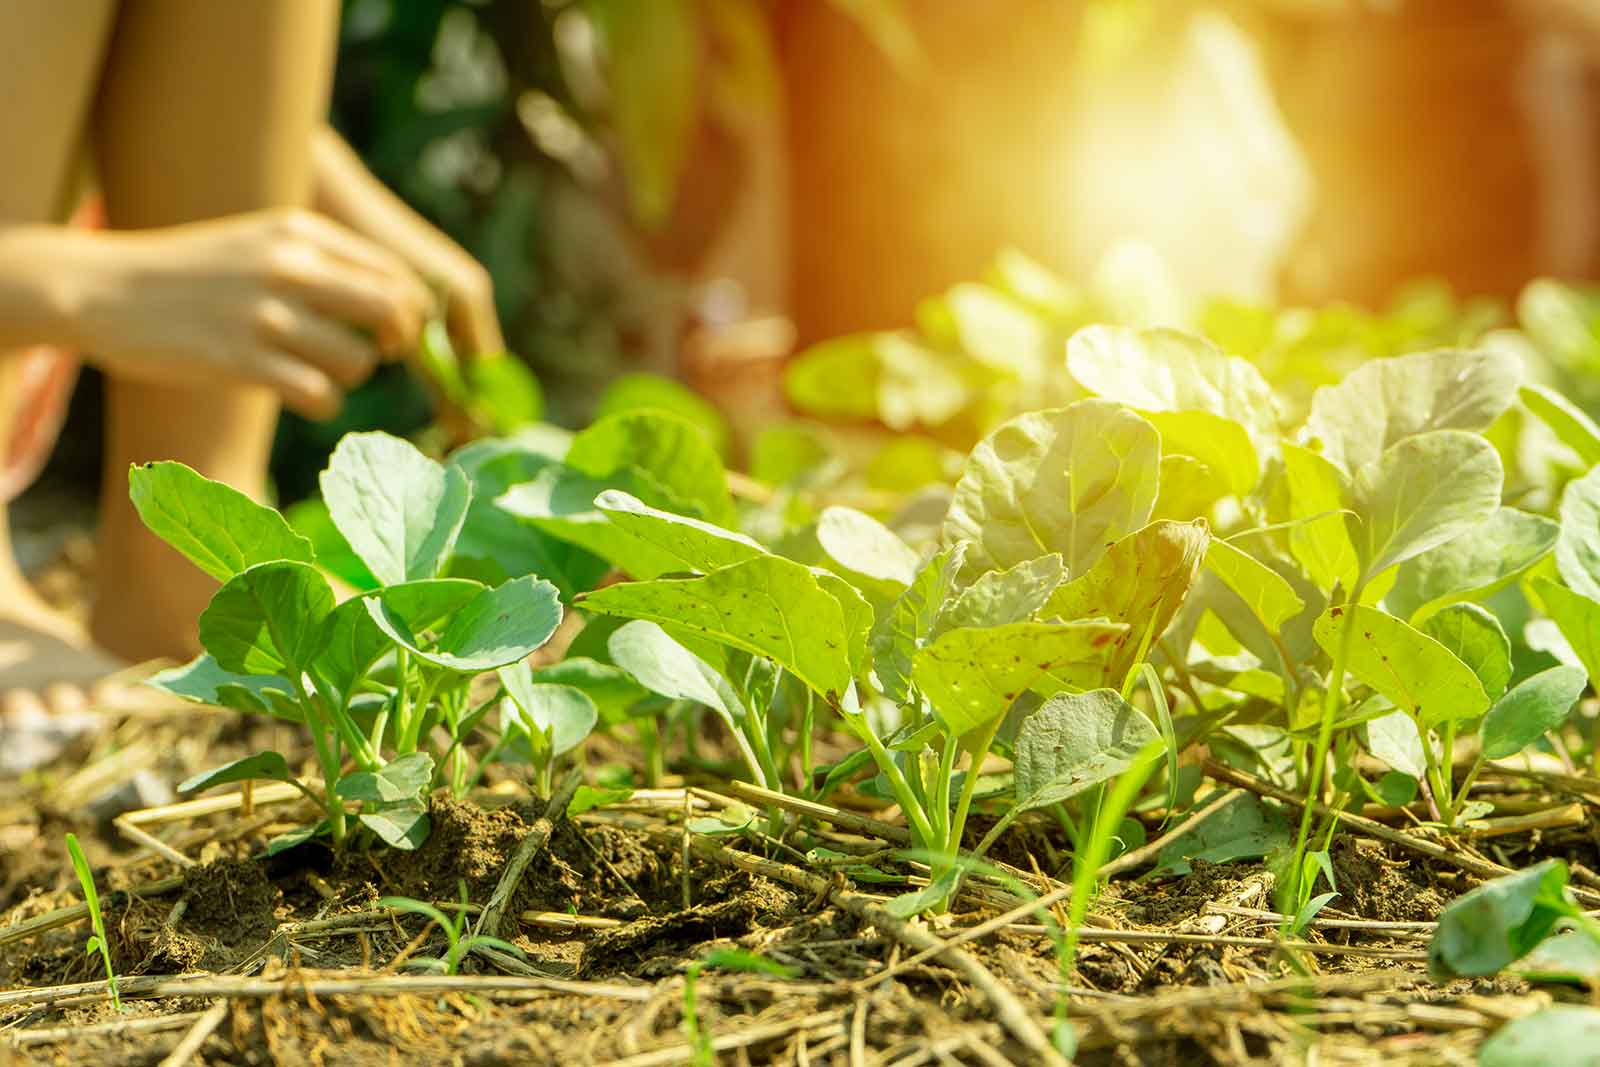 20 + 1 Facts About Regenerative Farming You Didn’t Know